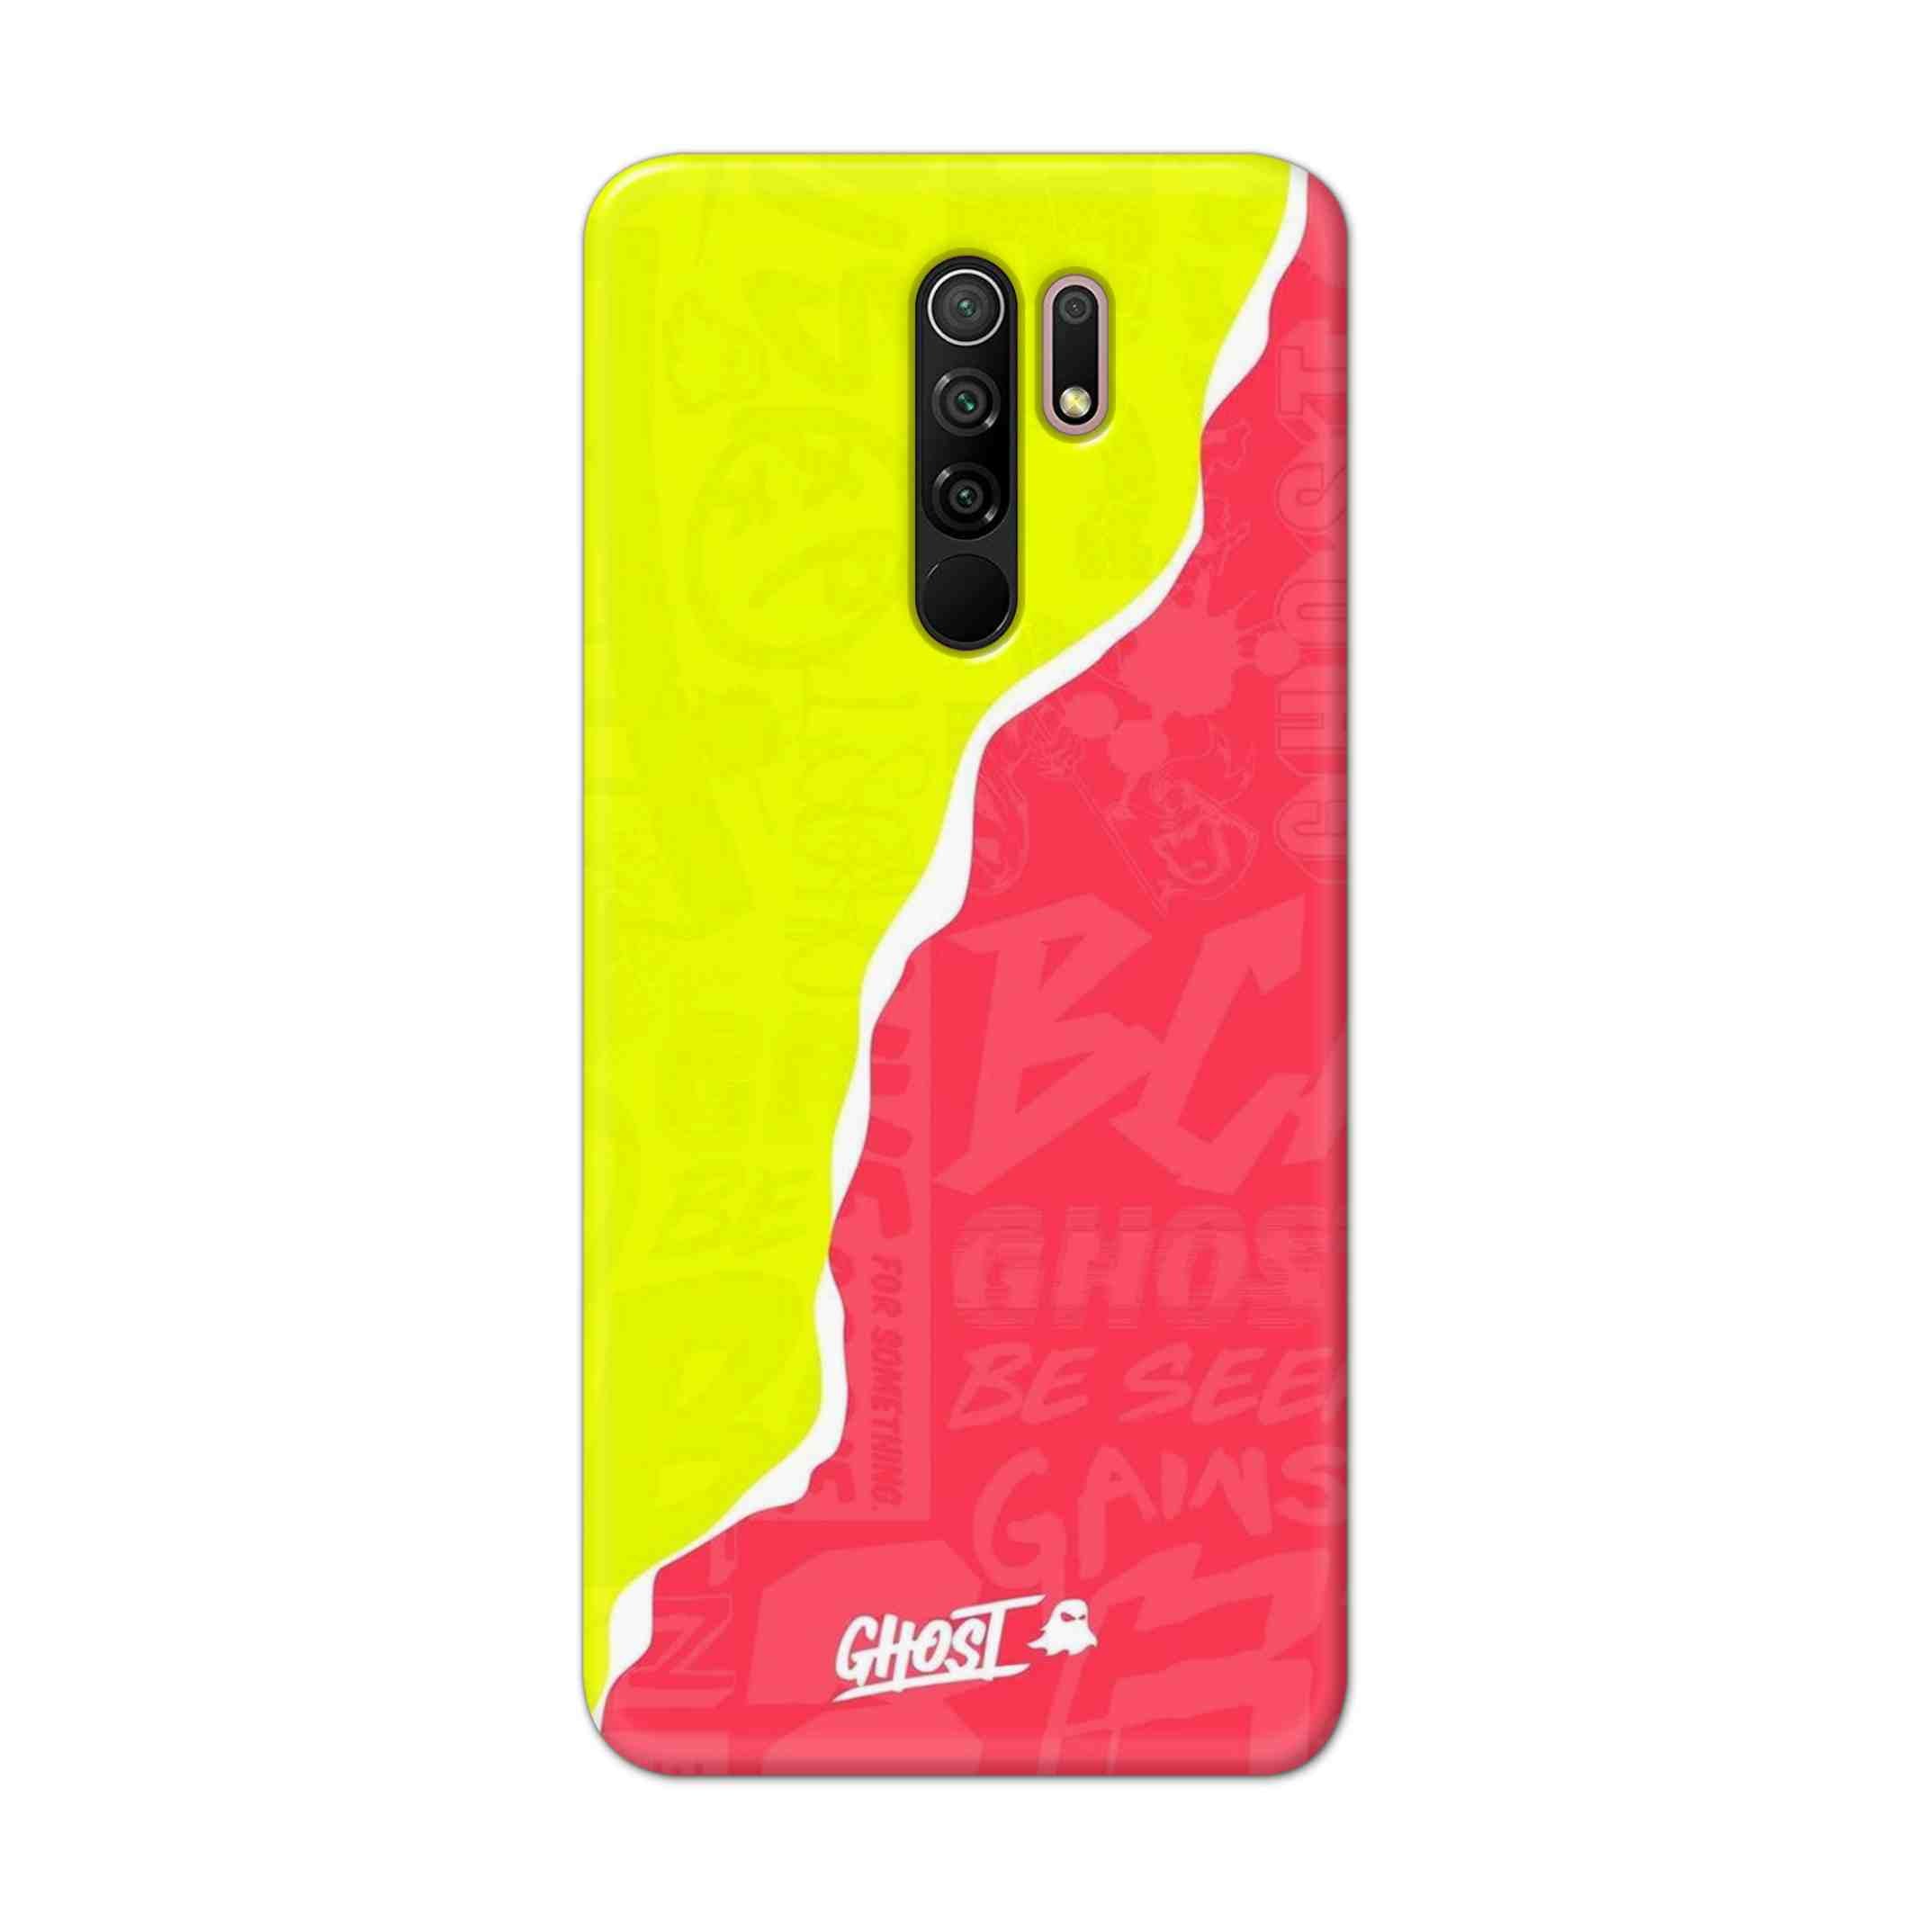 Buy Ghost Hard Back Mobile Phone Case Cover For Xiaomi Redmi 9 Prime Online